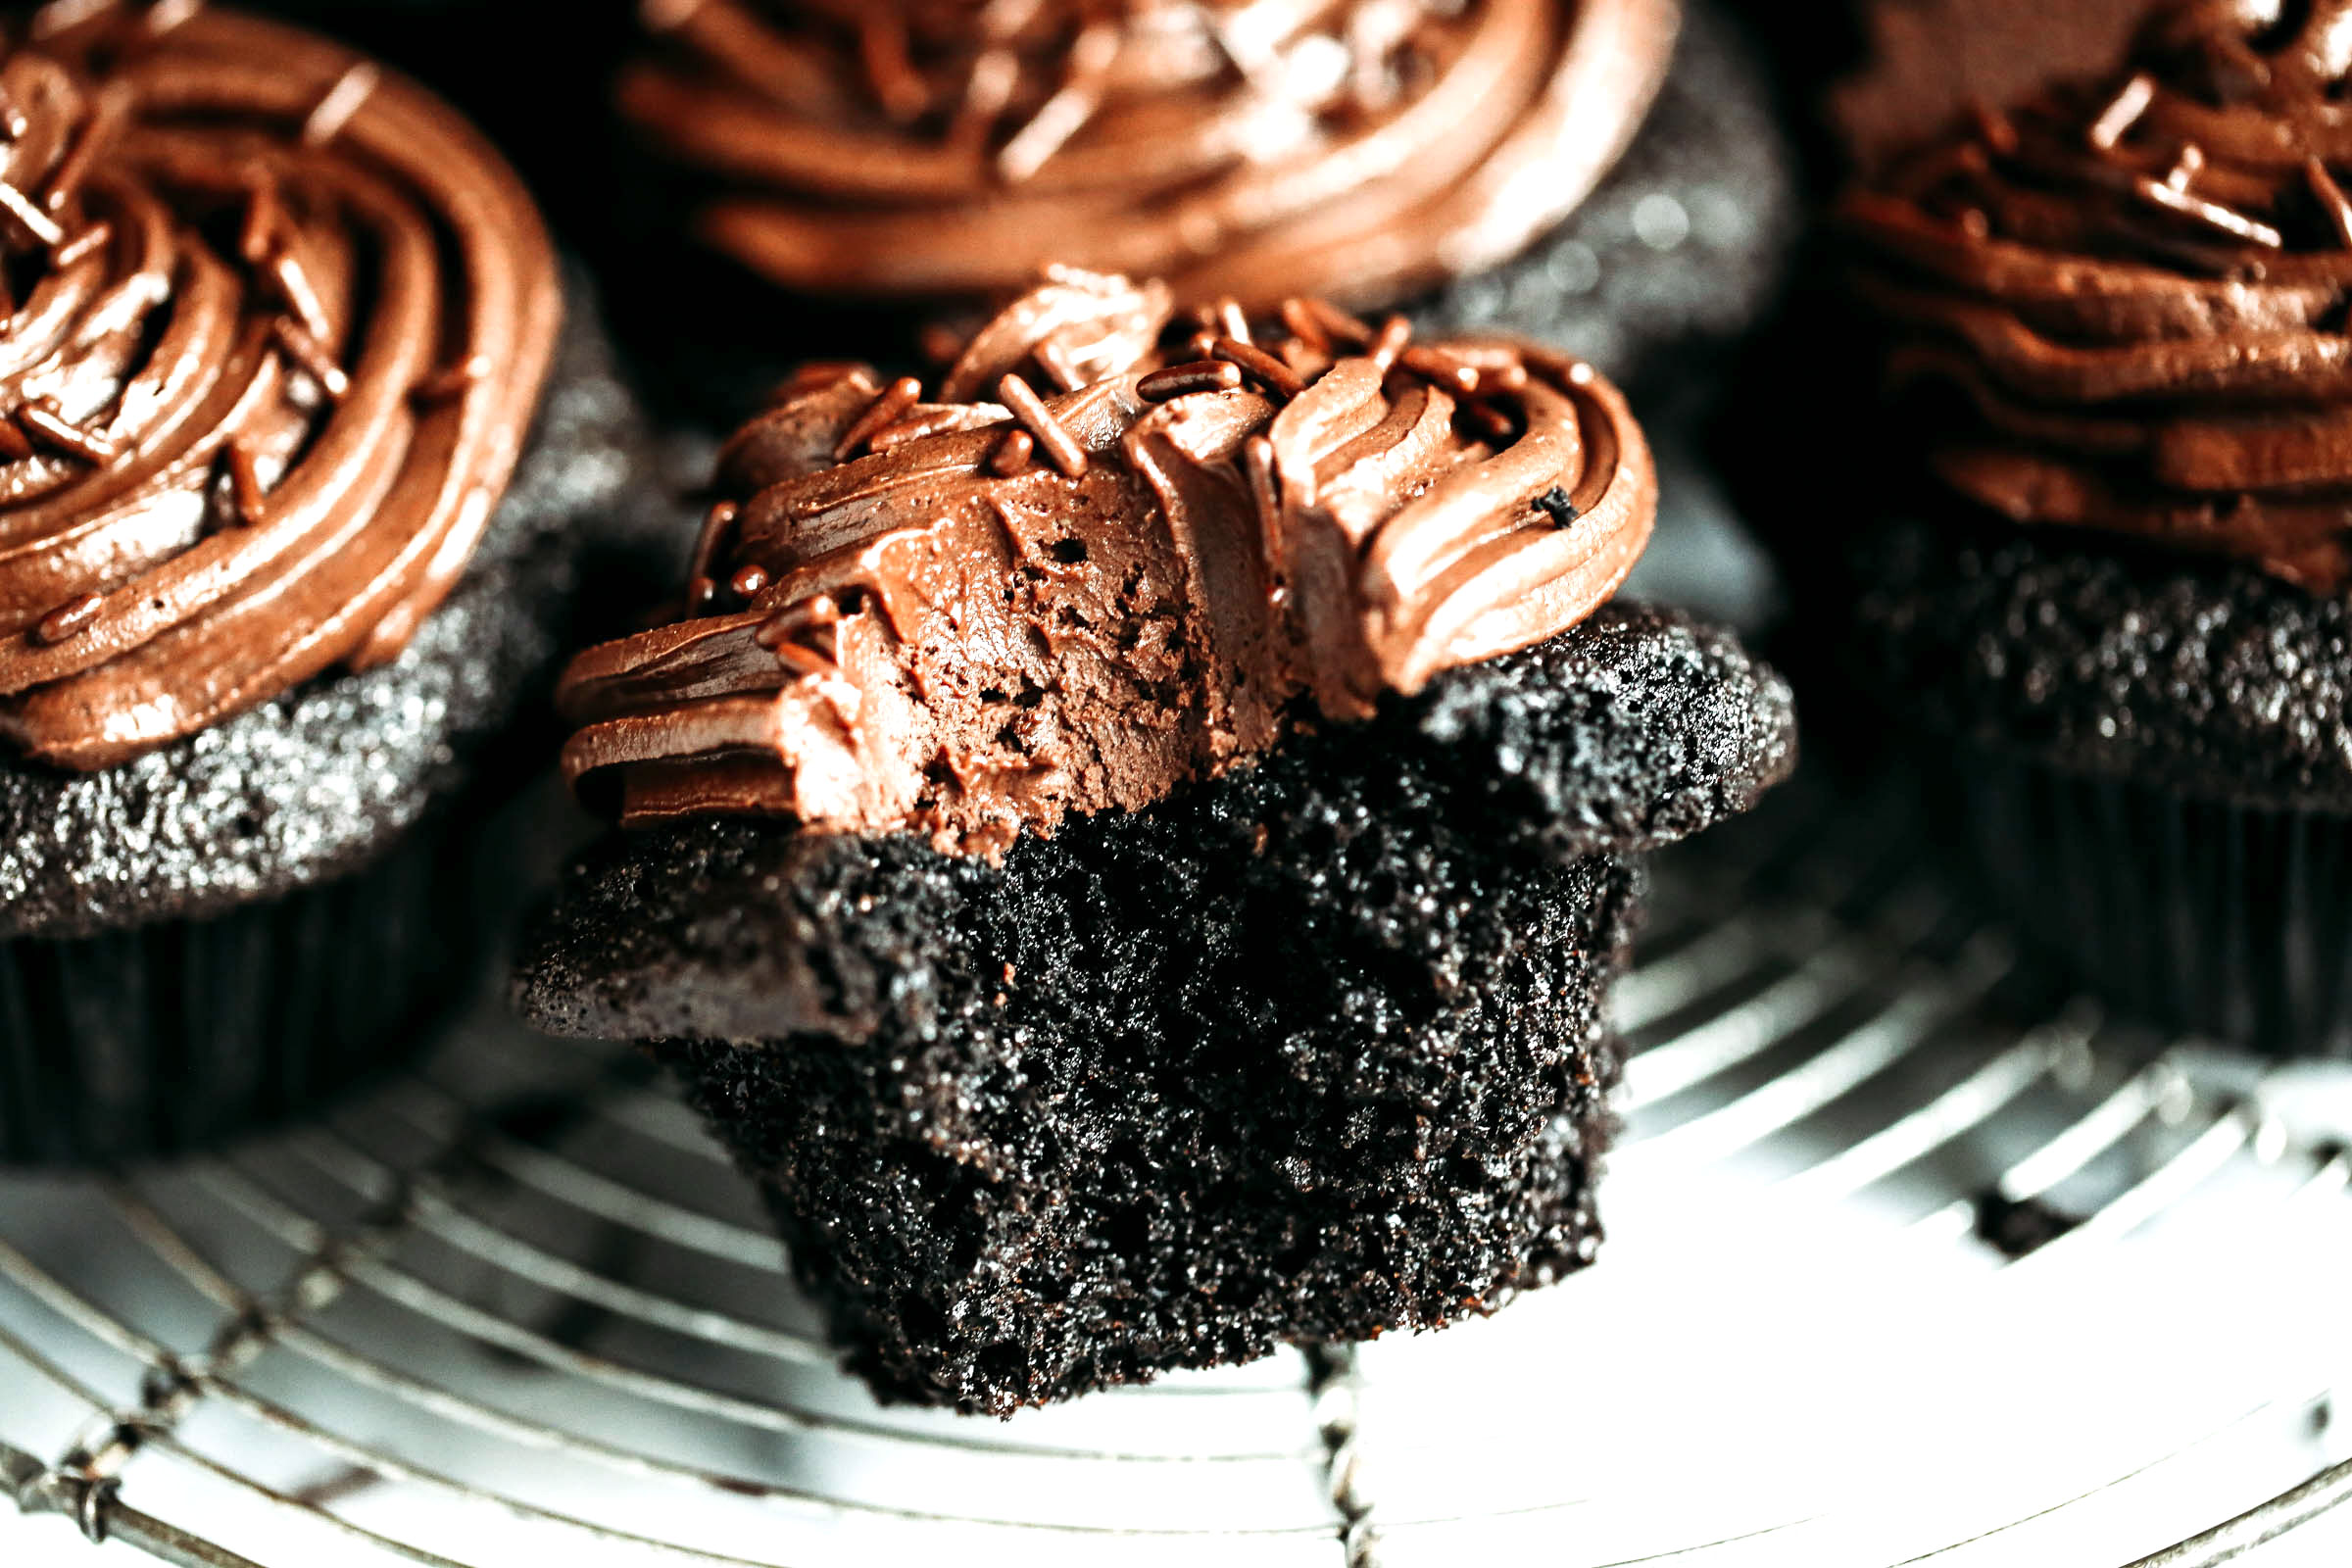 Paleo chocolate cupcakes-moist, but not eggy! These paleo cupcakes have a rich, dark chocolate taste and are covered in a whipped dairy free refined sugar free chocolate frosting! Coconut flour cupcakes. Best easy Paleo cupcakes. Paleo cupcakes recipes. Gluten free chocolate cupcakes. Gluten free coconut flour cupcakes. Dairy free healthy cupcakes. Paleo chocolate frosting.